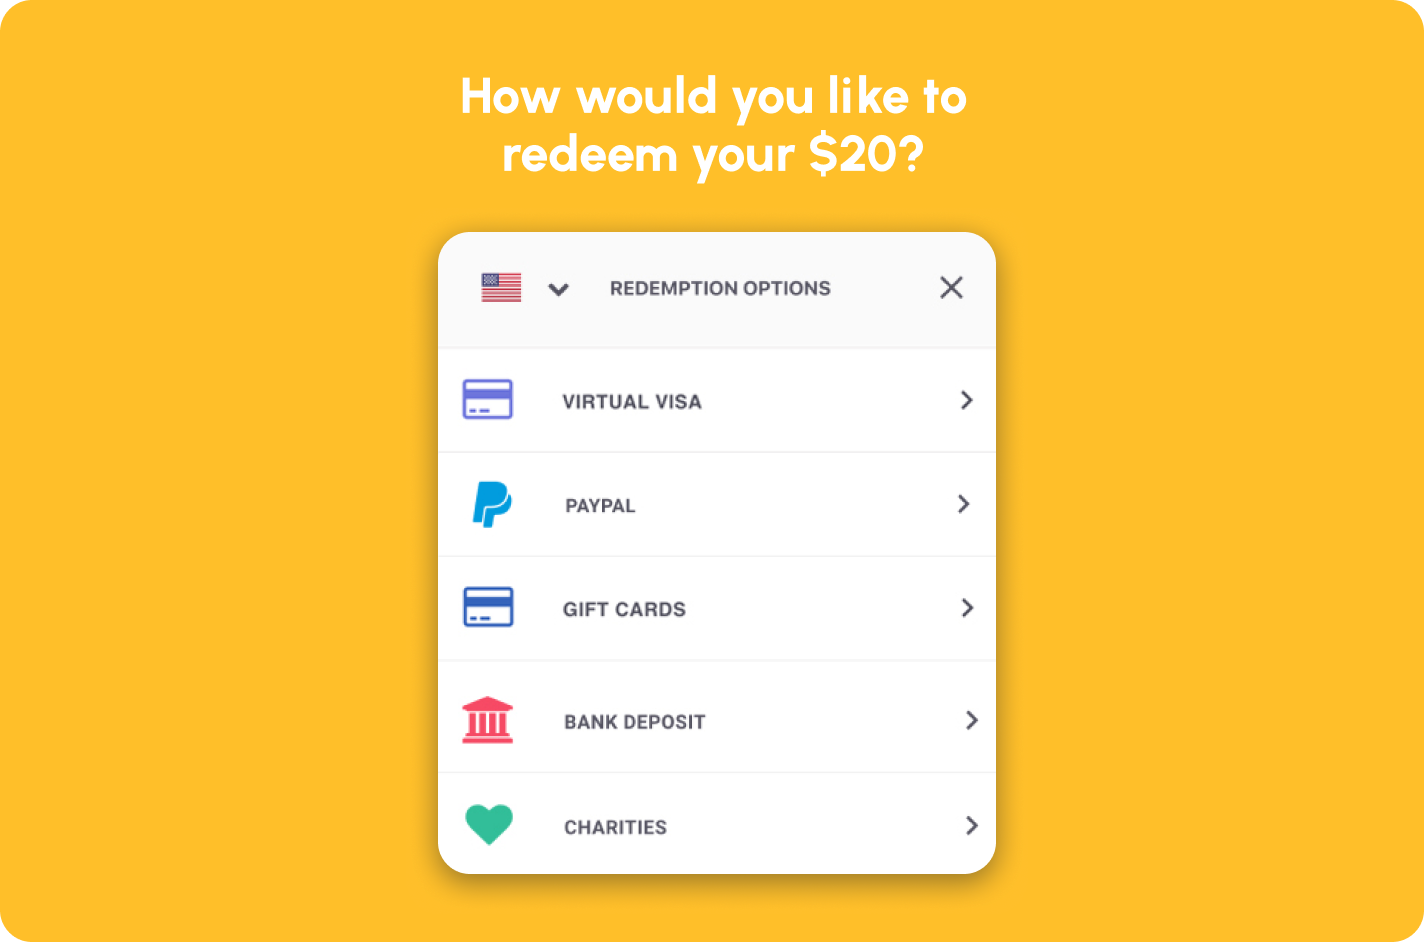 Image of Tremendous' reward redemption screen, displaying the incentive options available to recipients, including Visa prepaid cards, gift cards, money transfer options, and charities.